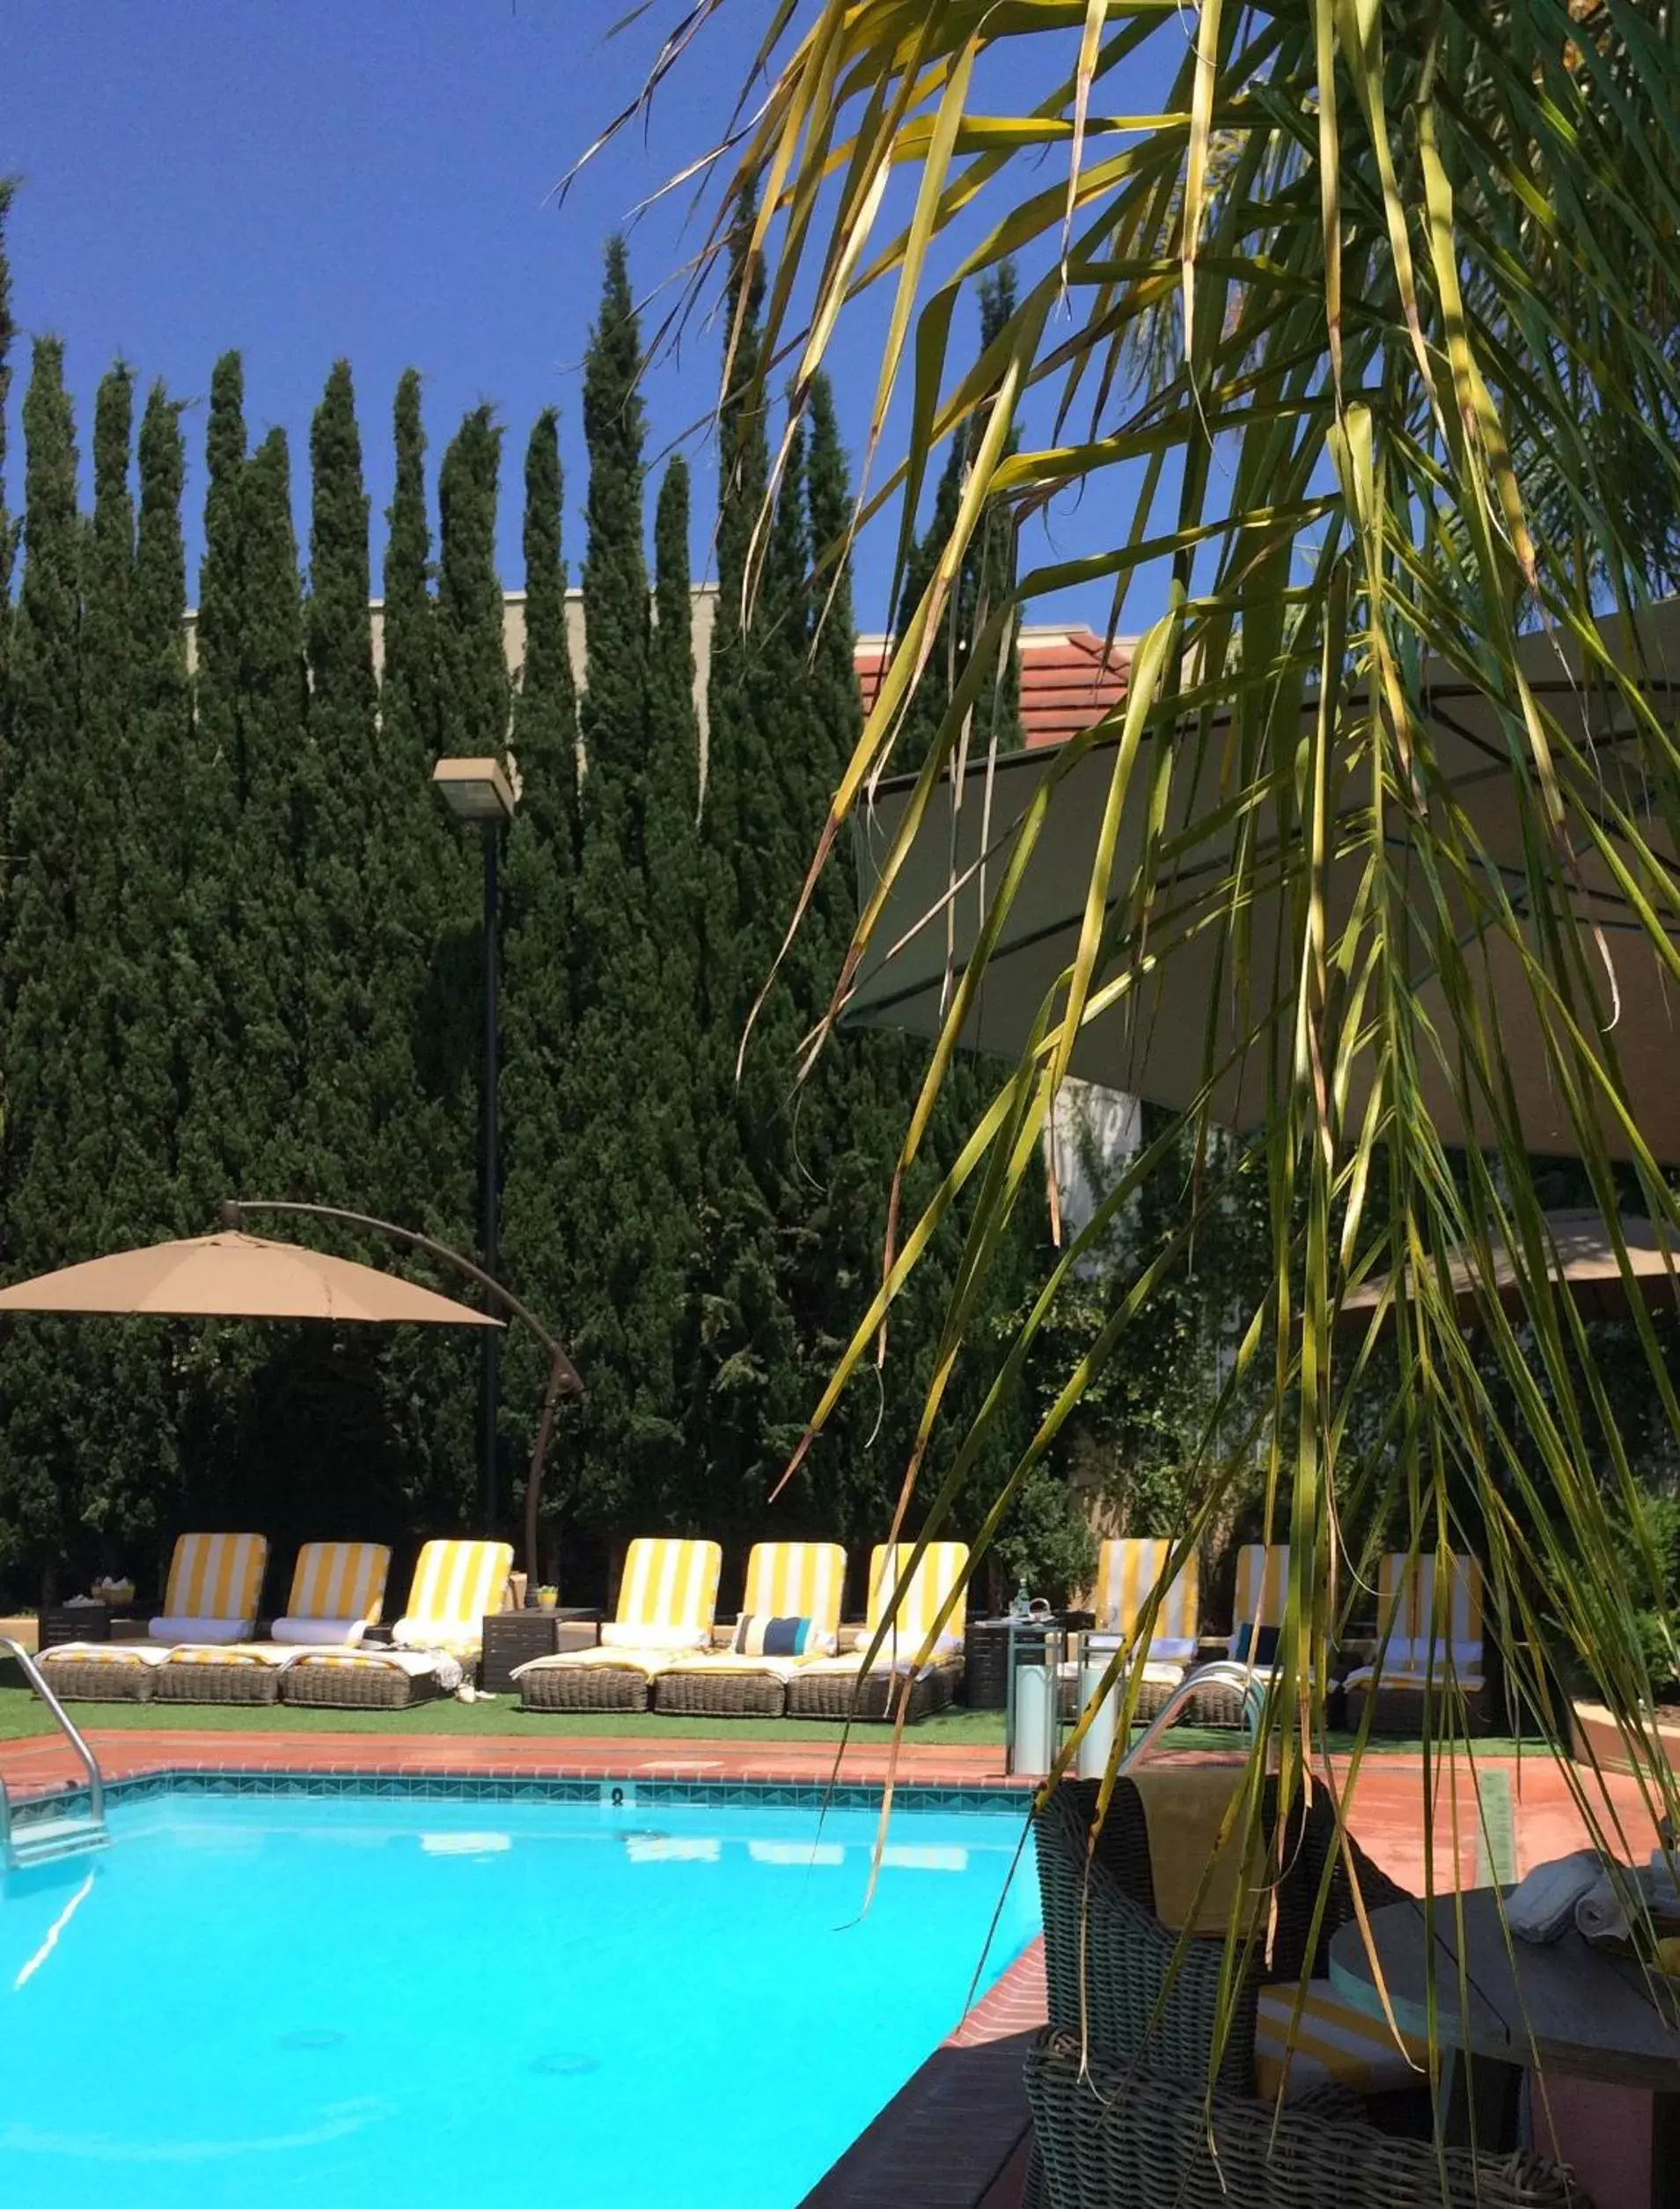 Garden, Swimming Pool in Hollywood Hotel - The Hotel of Hollywood Near Universal Studios